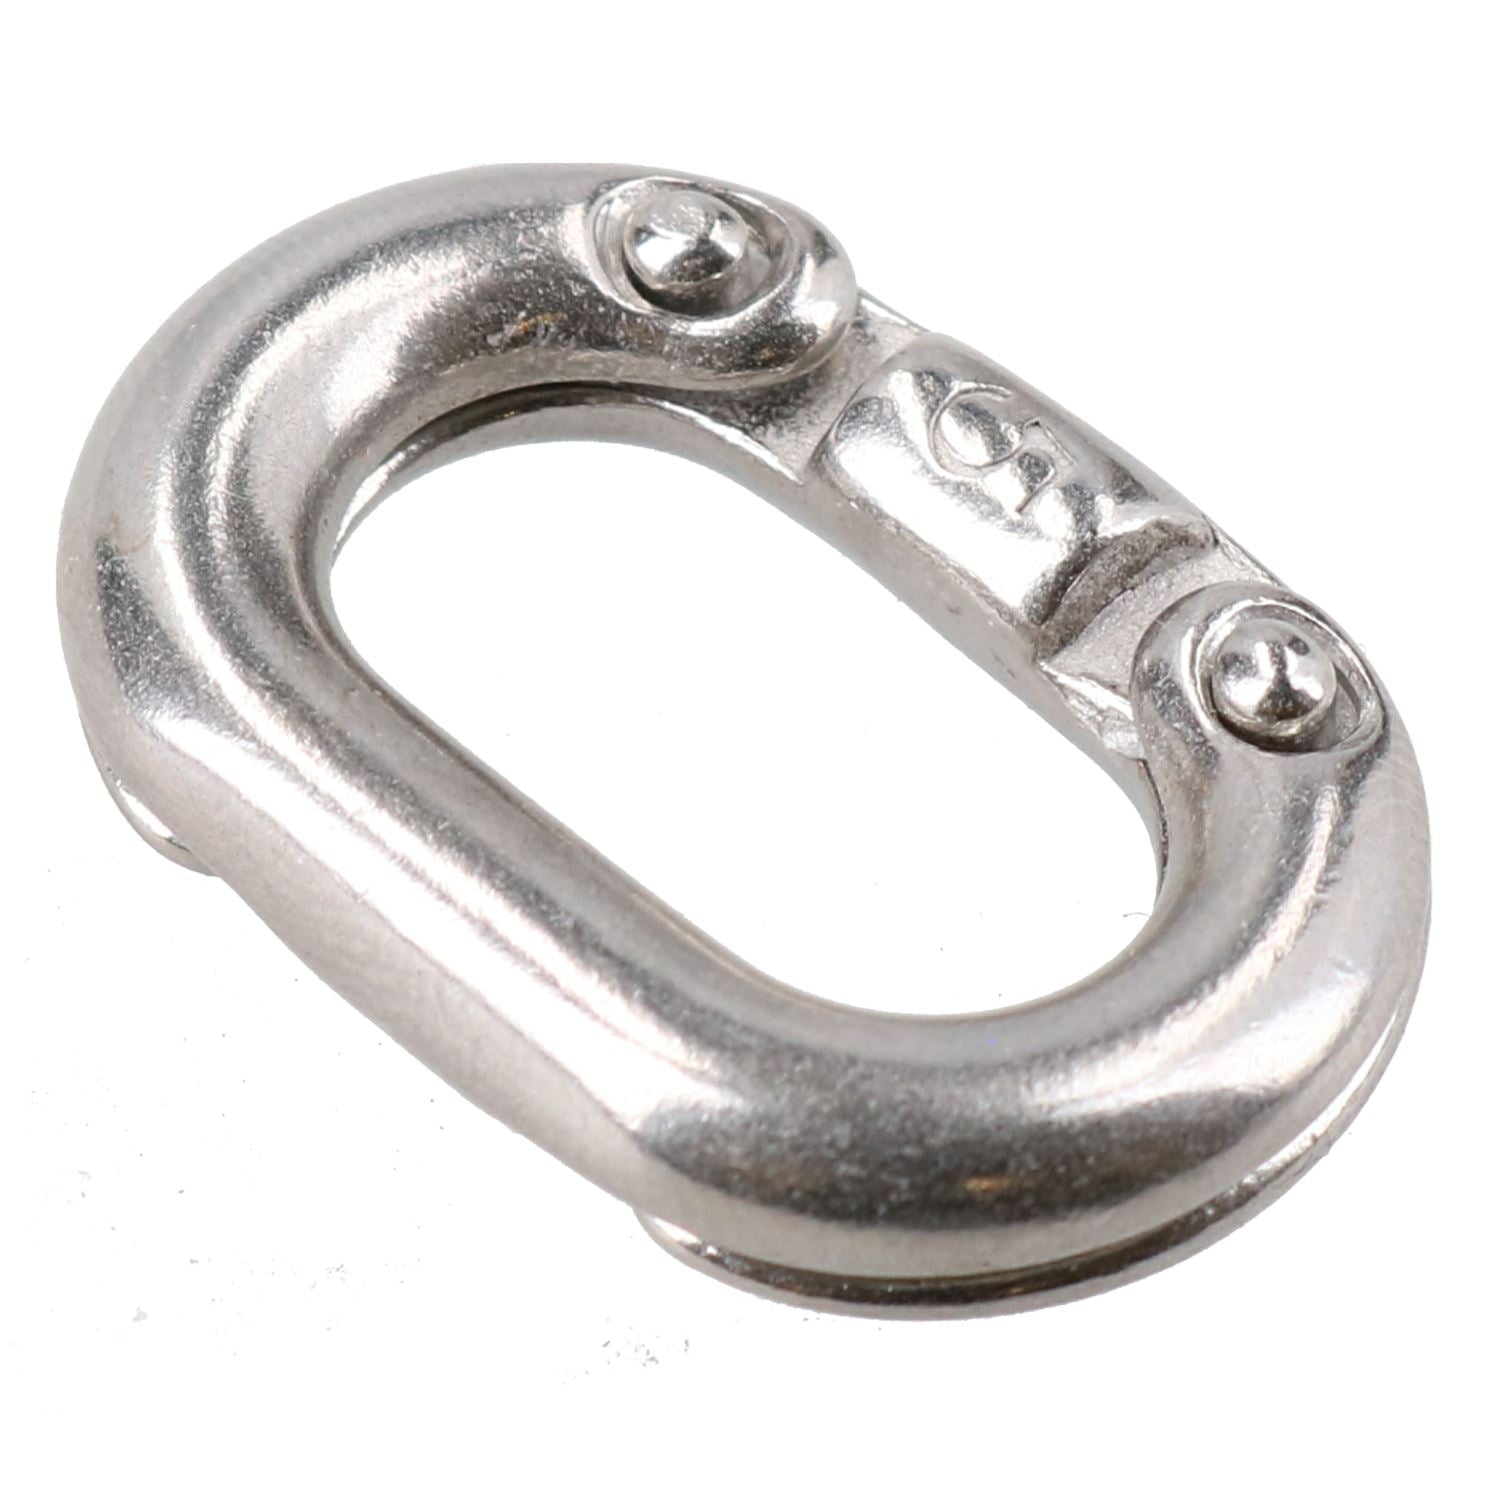 Chain Connecting Link 5mm Marine Grade Stainless Steel Split Shackle